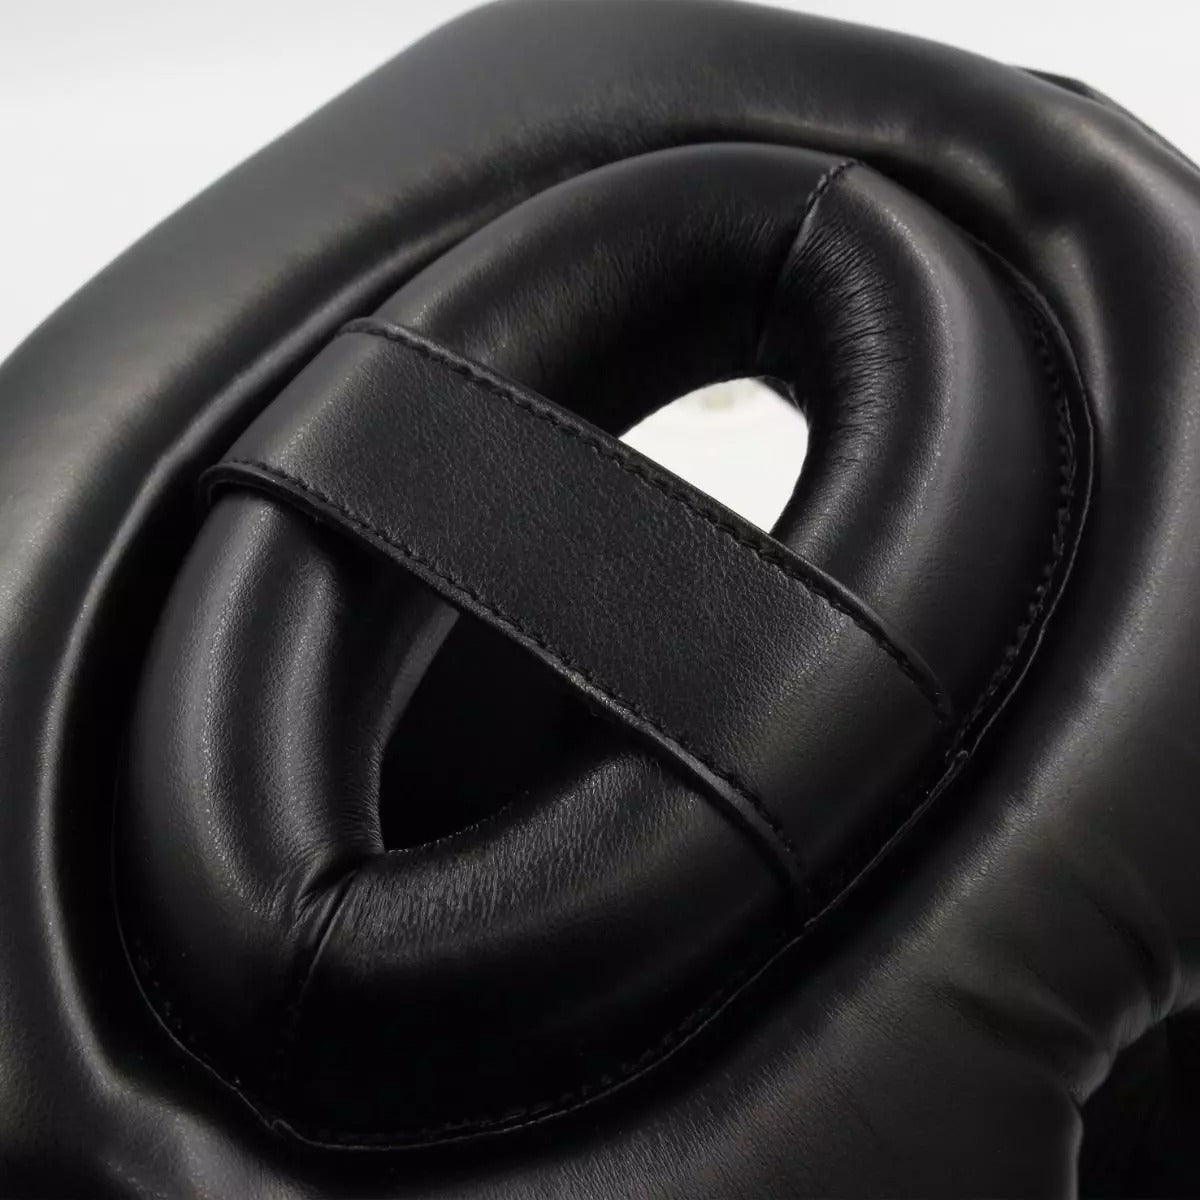 adidas Speed Boxing Head Guard Sparring MMA Muay Thai